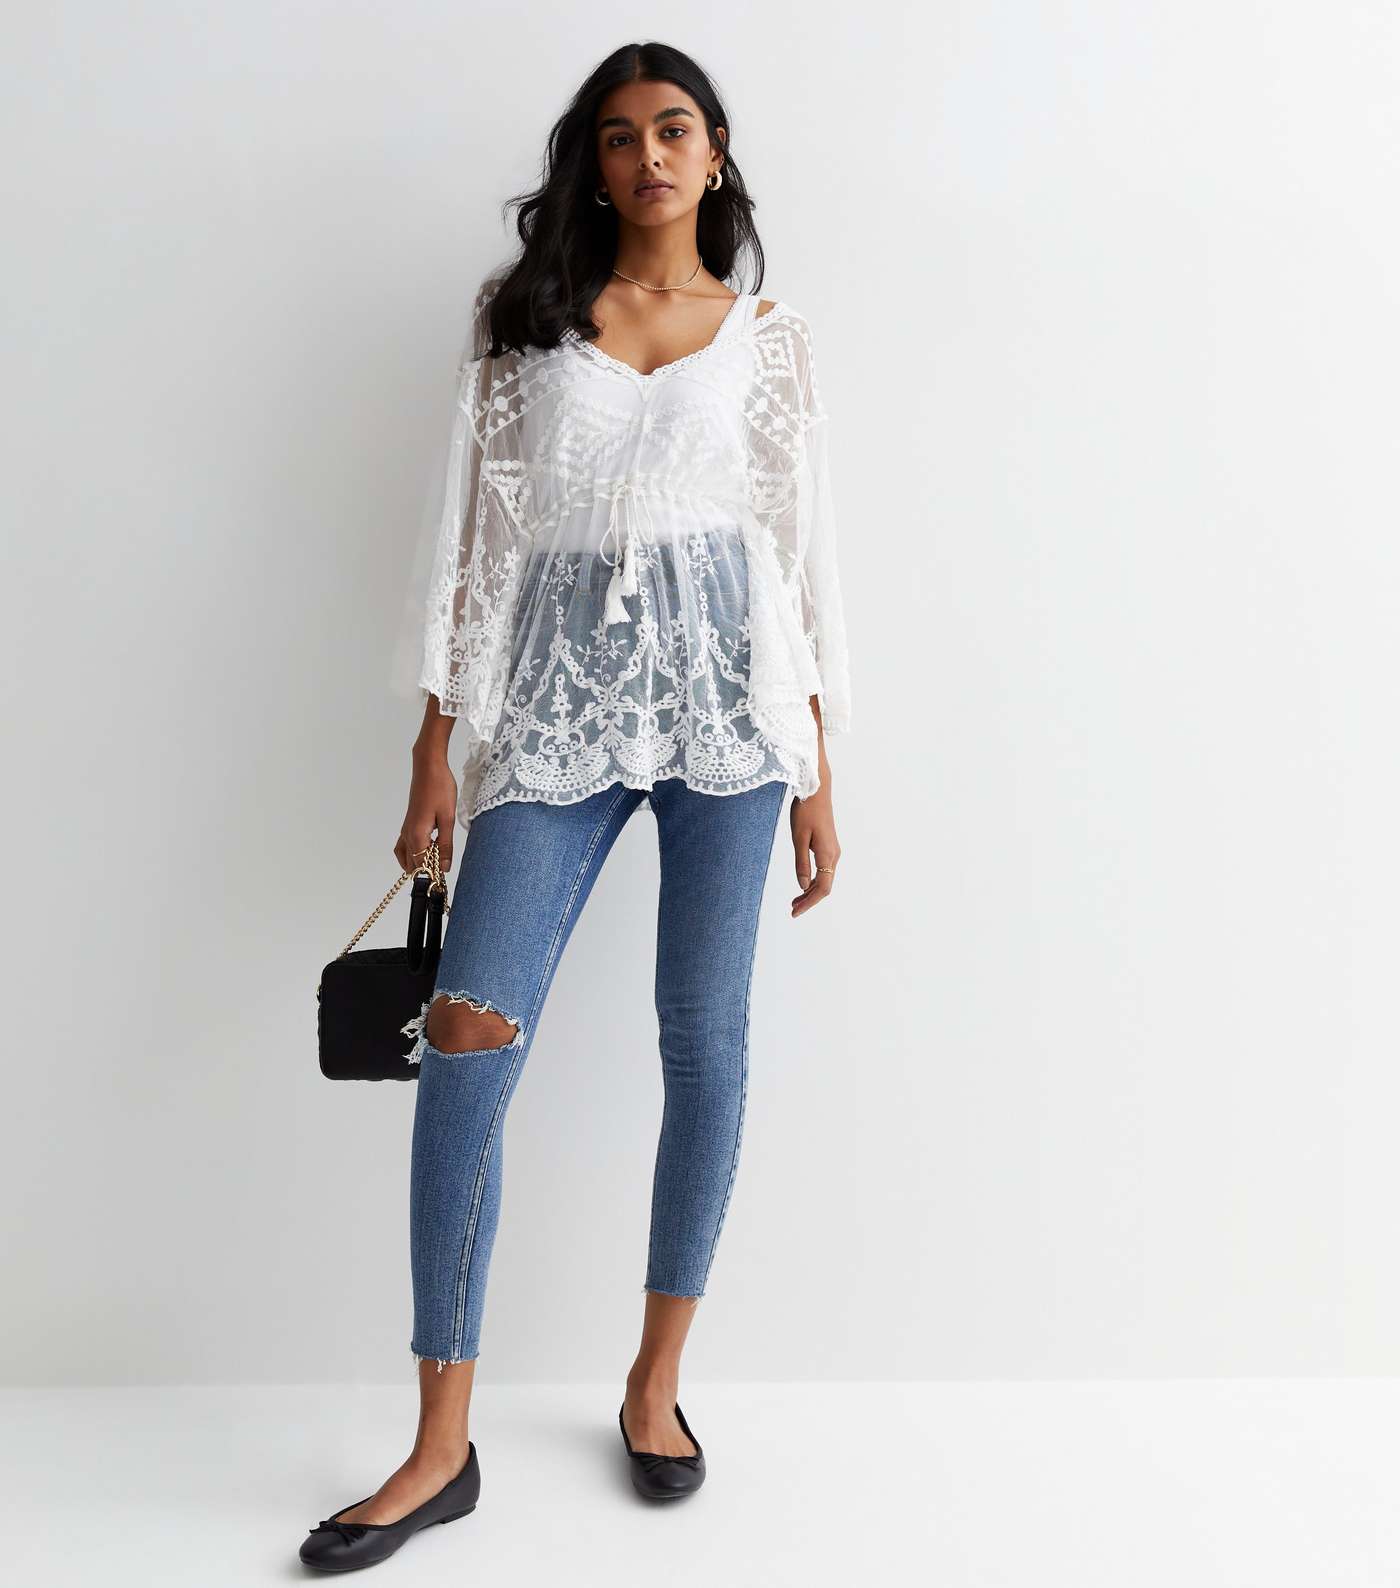 Gini London White Lace Embroidered Tie Front Top Image 2